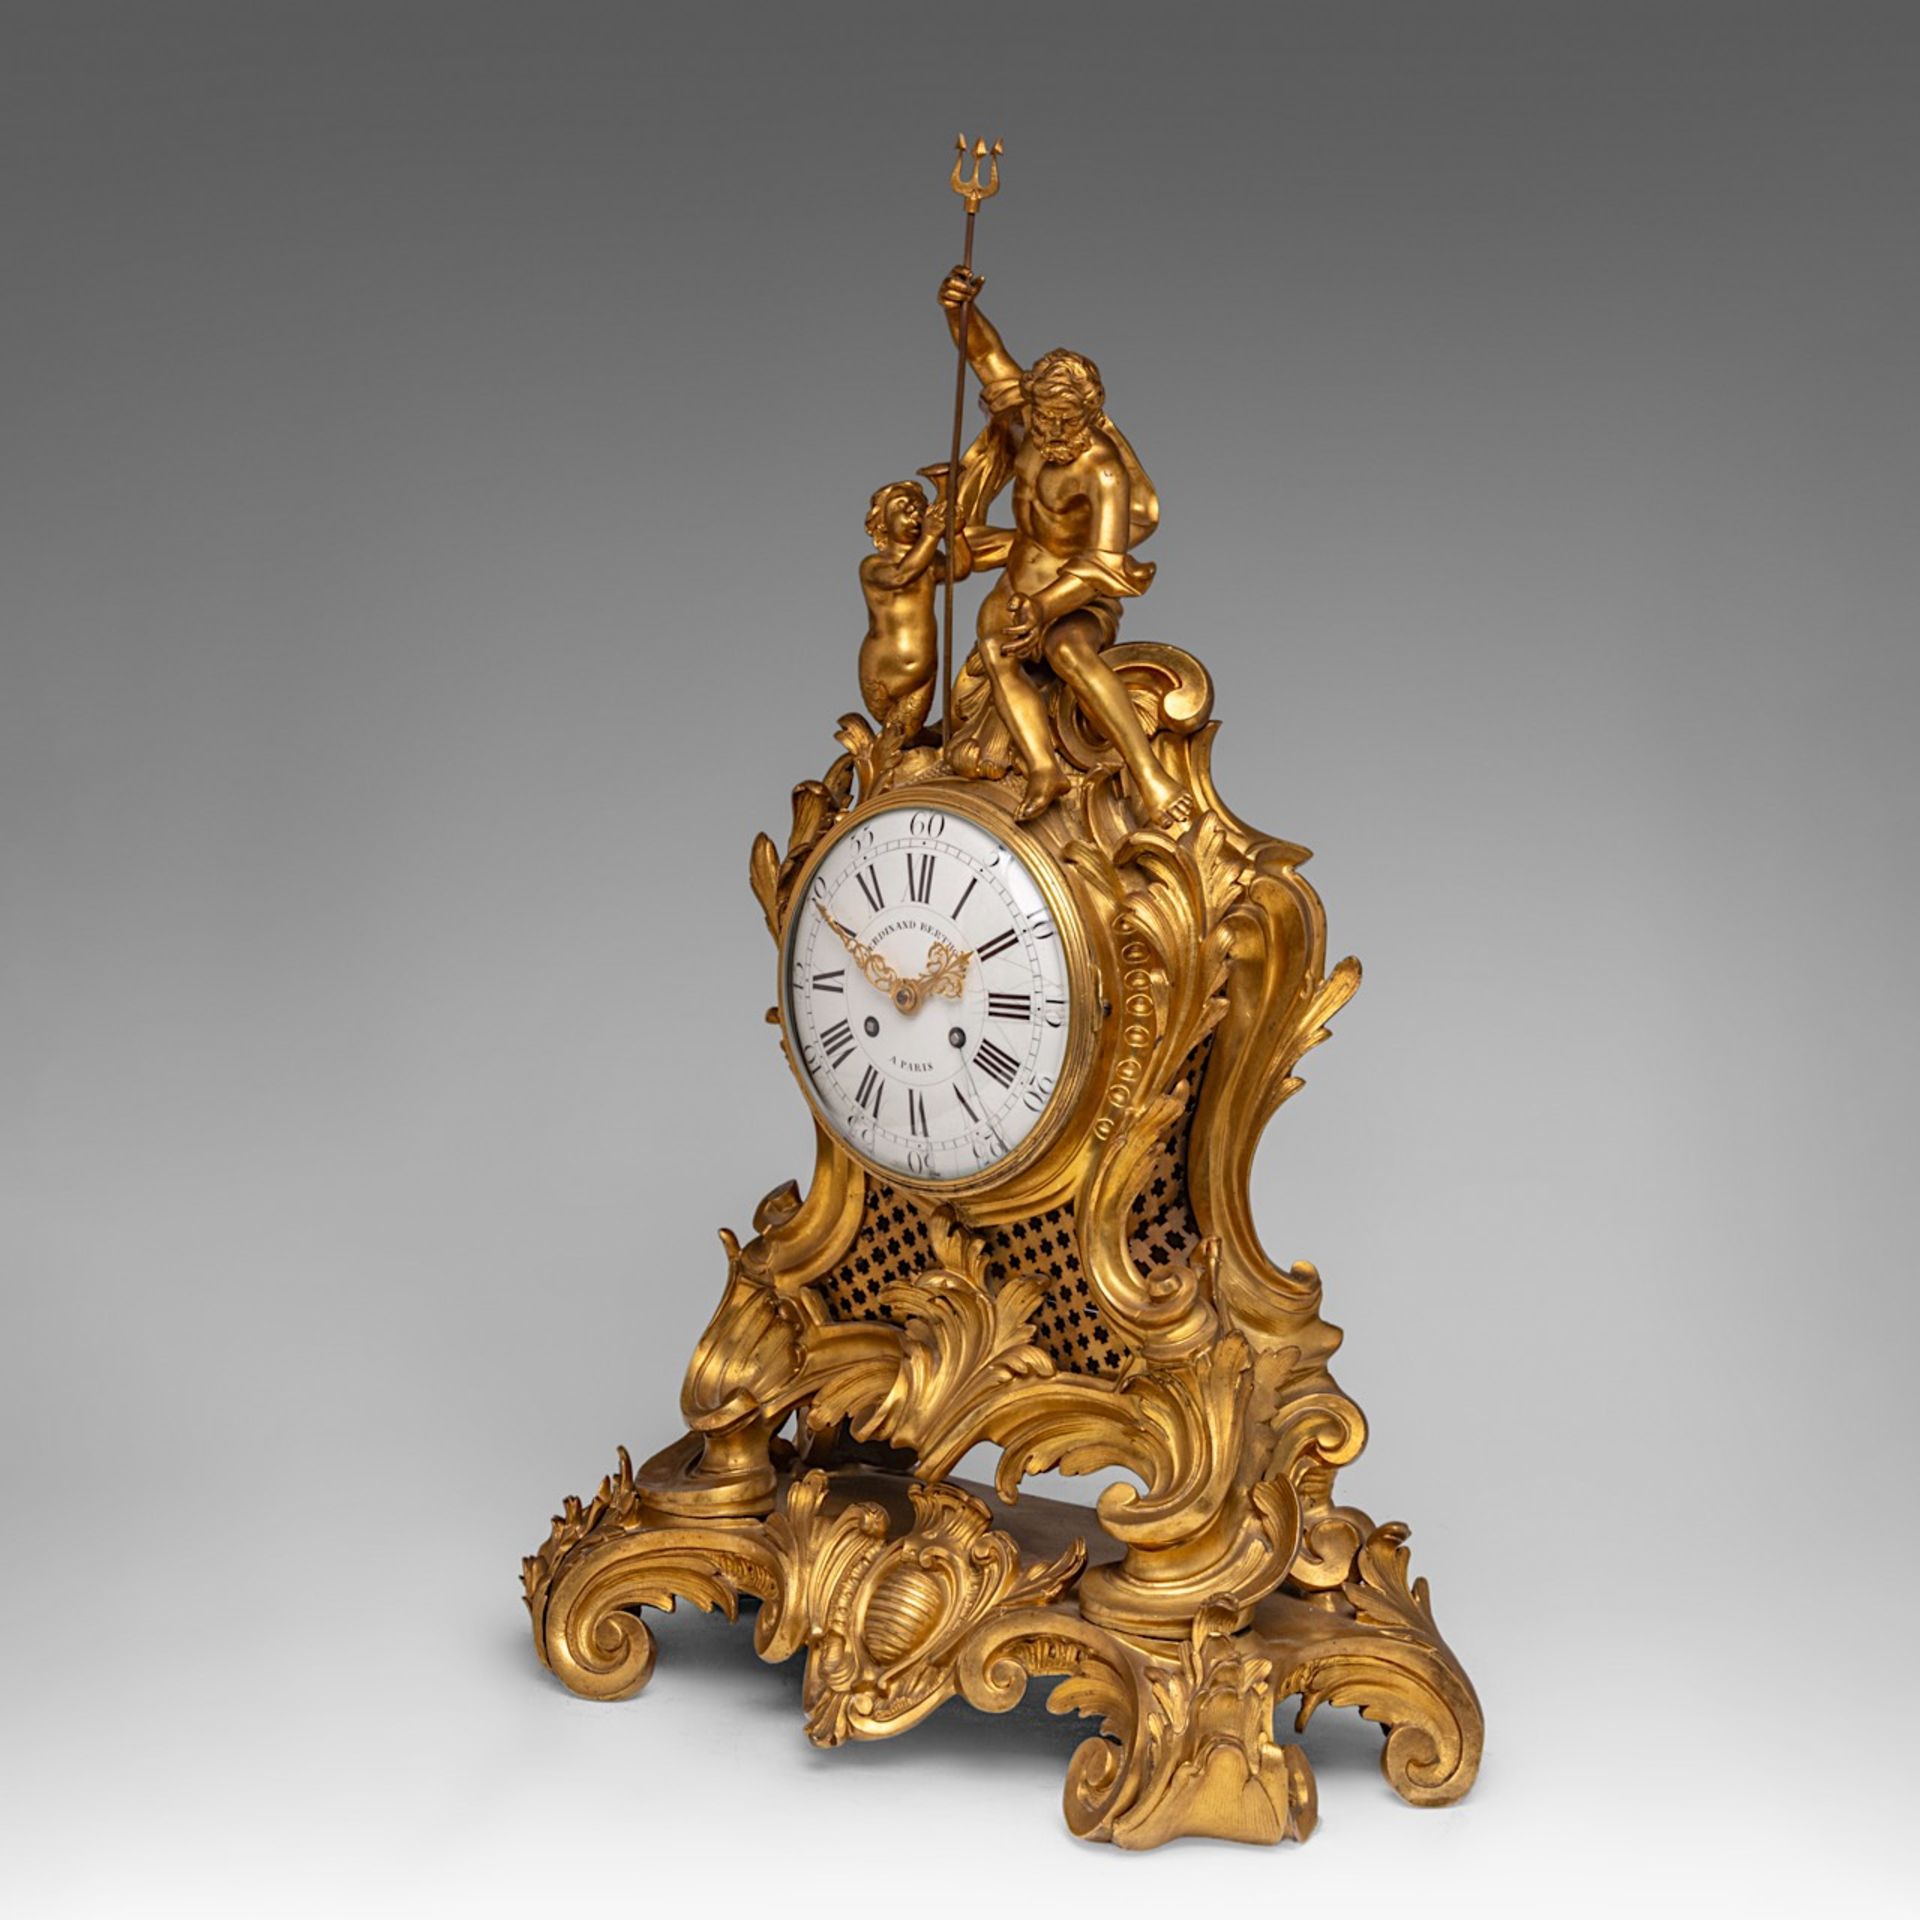 A Rococo Revival gilt bronze mantle clock, decorated with Neptune, Ferdinand Berthoud, H 71 cm - Image 4 of 9